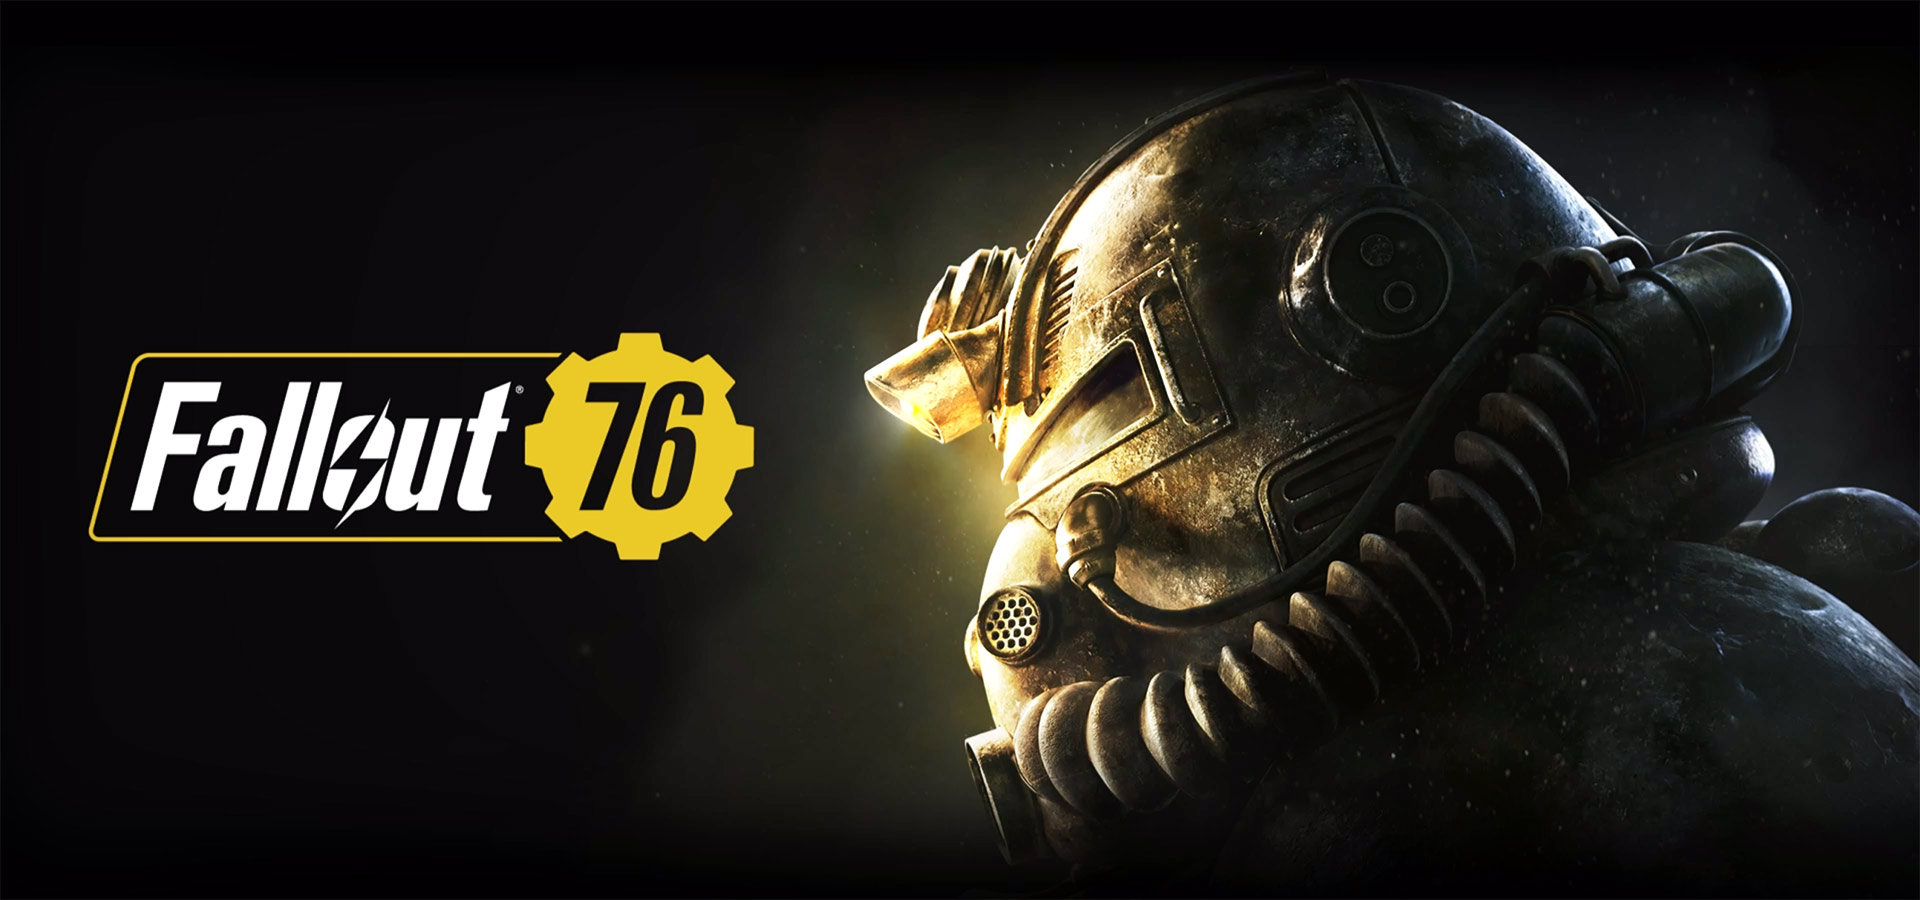 Detail Exit Power Armor Fallout 76 Nomer 37